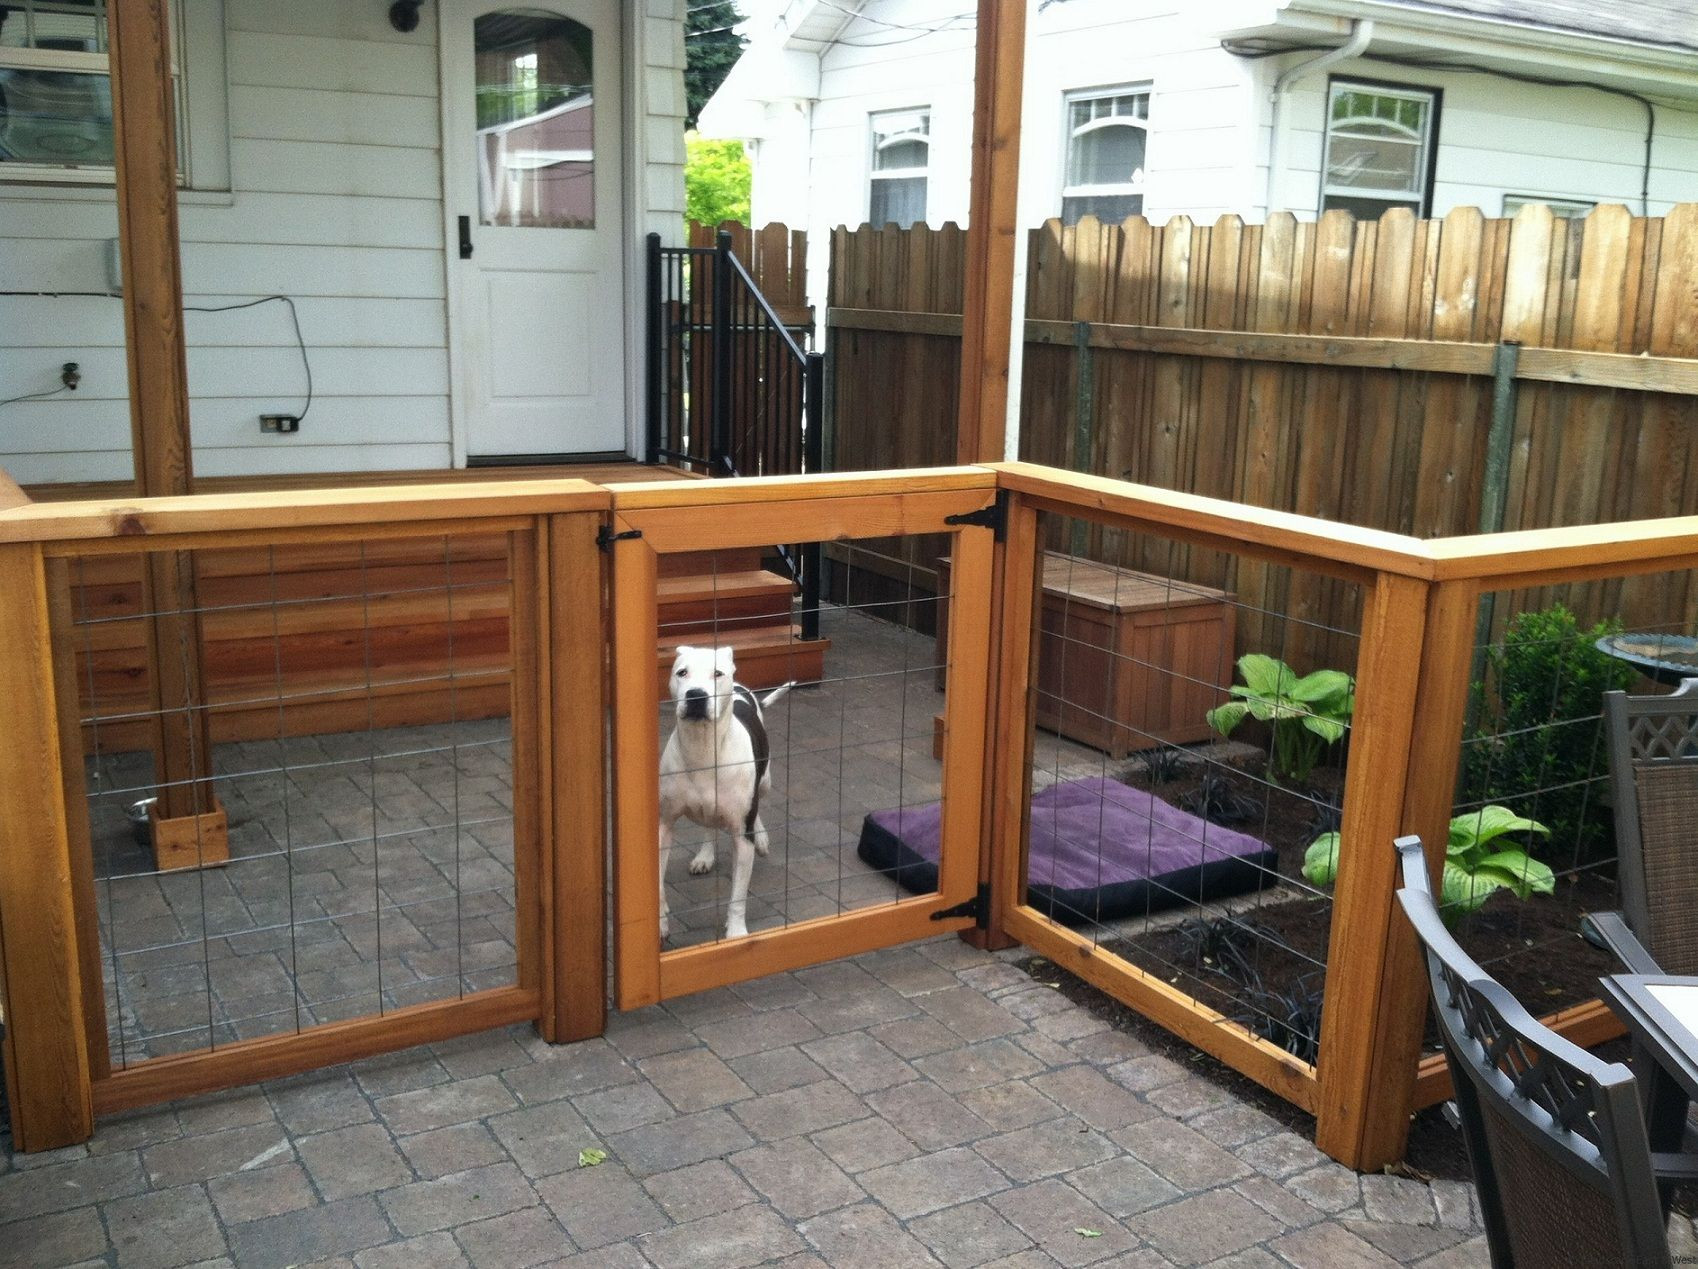 Backyard Fence For Dogs
 Fence Ideas For Dogs Backyard fence ideas to keep your